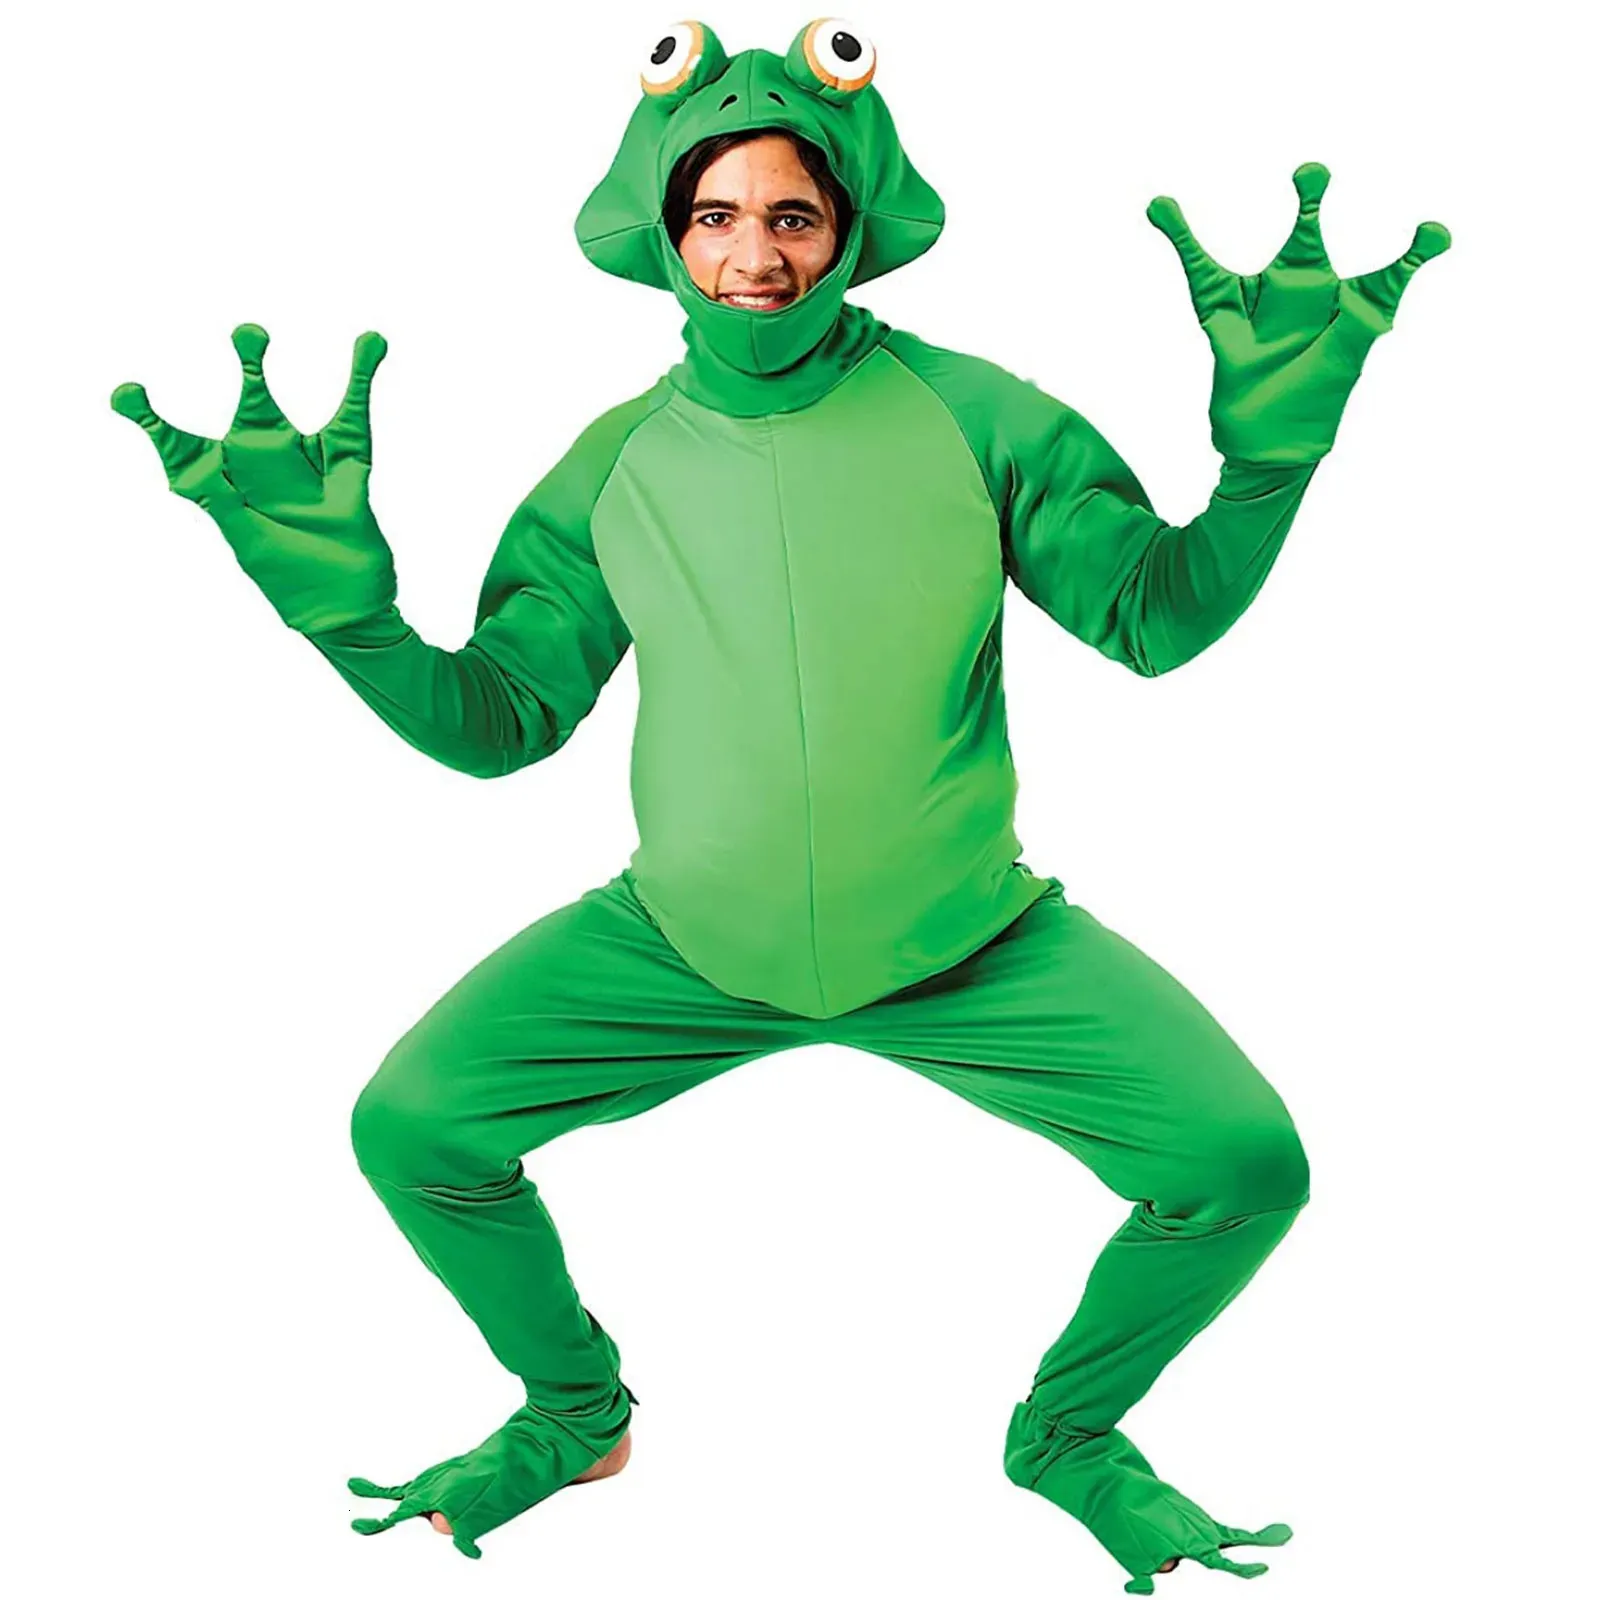 Theme Costume Men Funny Frog Cosplay Costume Novelty Adult Animal Halloween Cosplay Party Jumpsuit Outfit Overalls Plus Size Oversize Clothes 230927